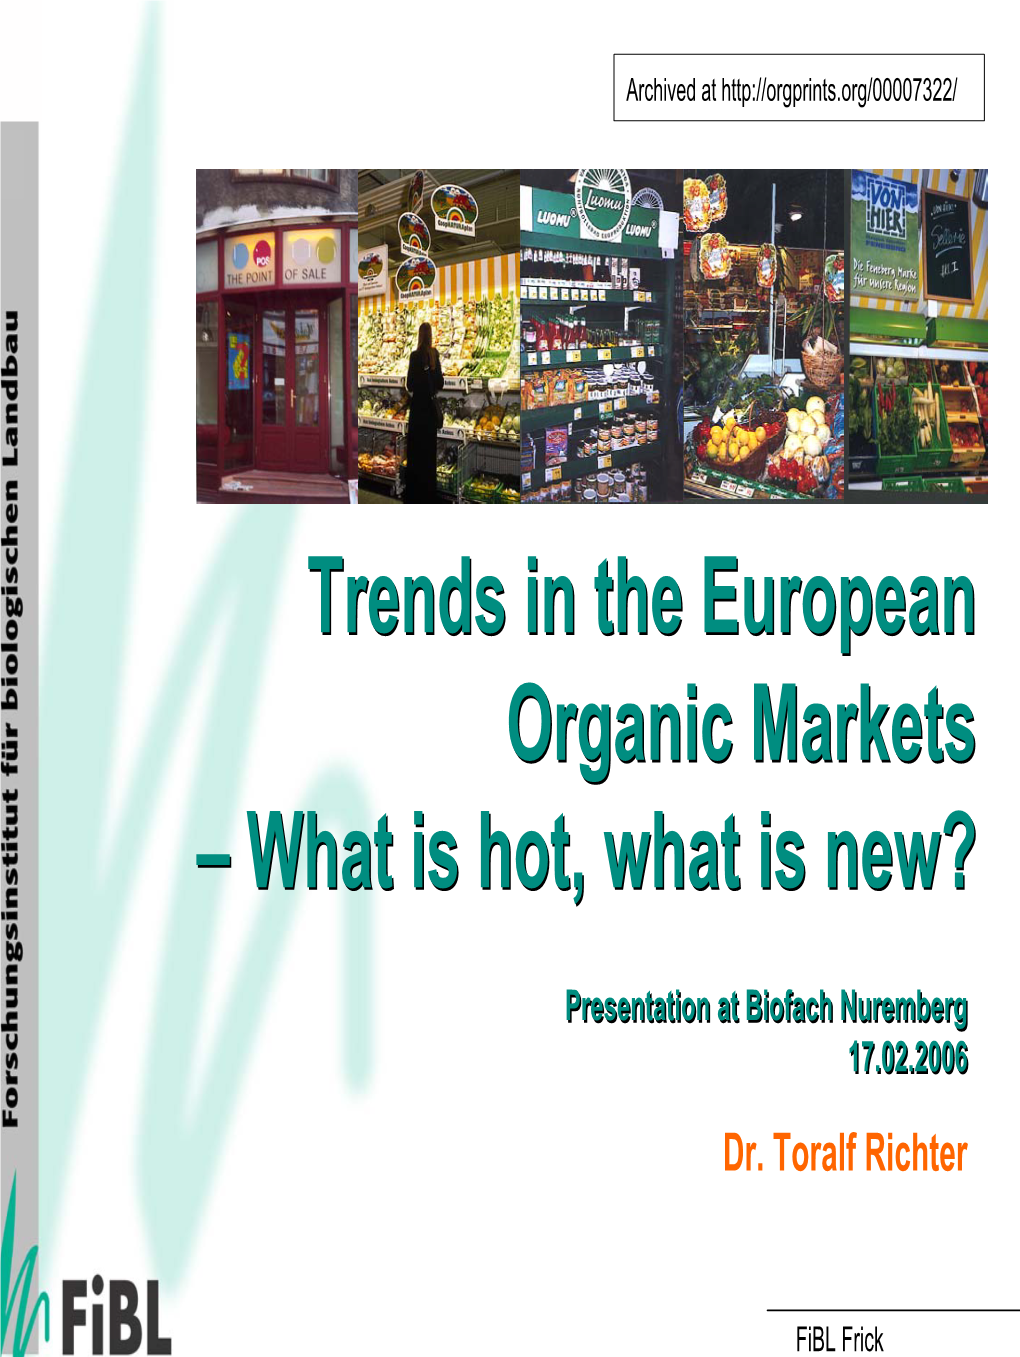 Trends in the European Organic Markets – What Is Hot, What Is New